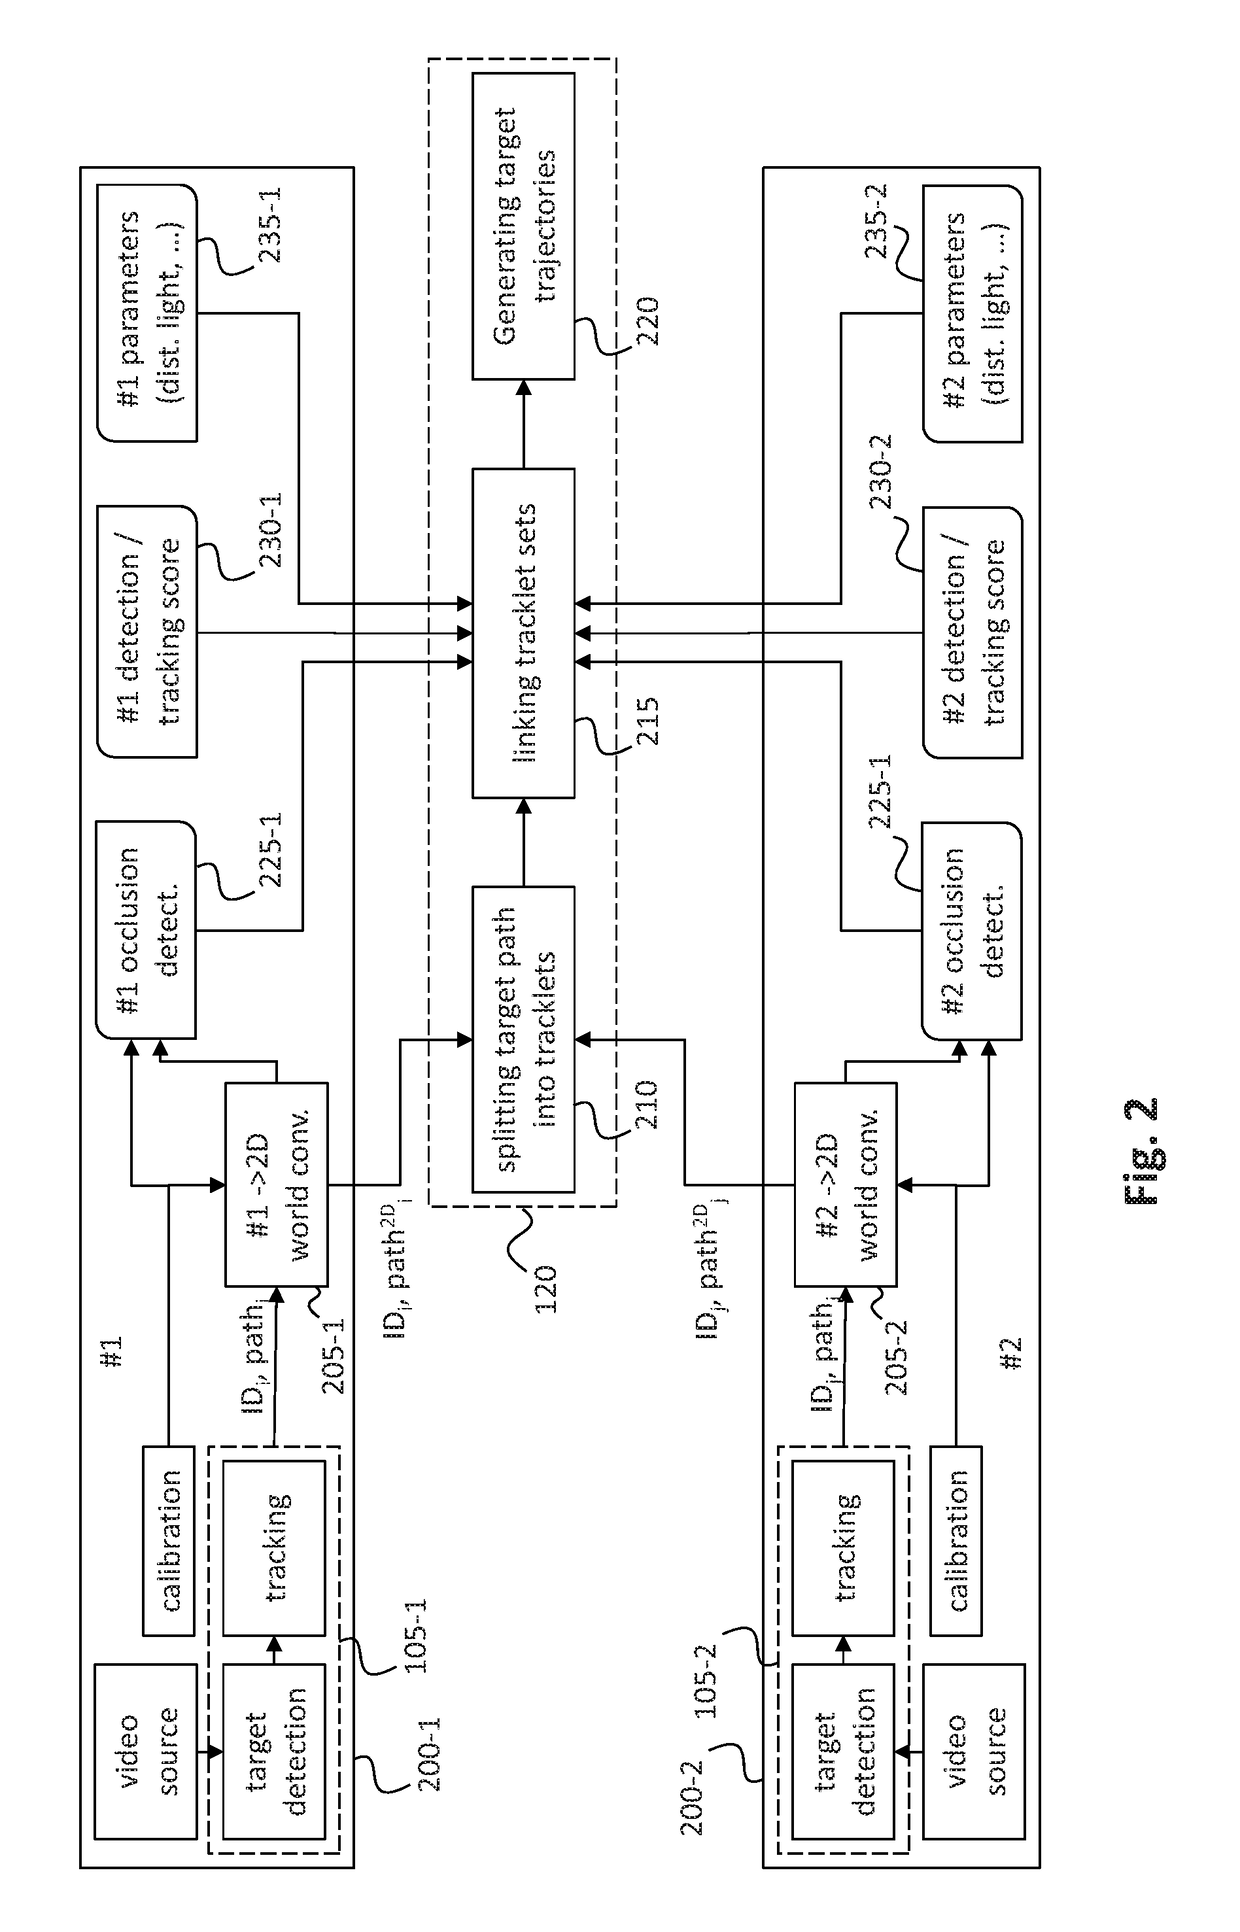 Methods, devices and computer programs for tracking targets using independent tracking modules associated with cameras